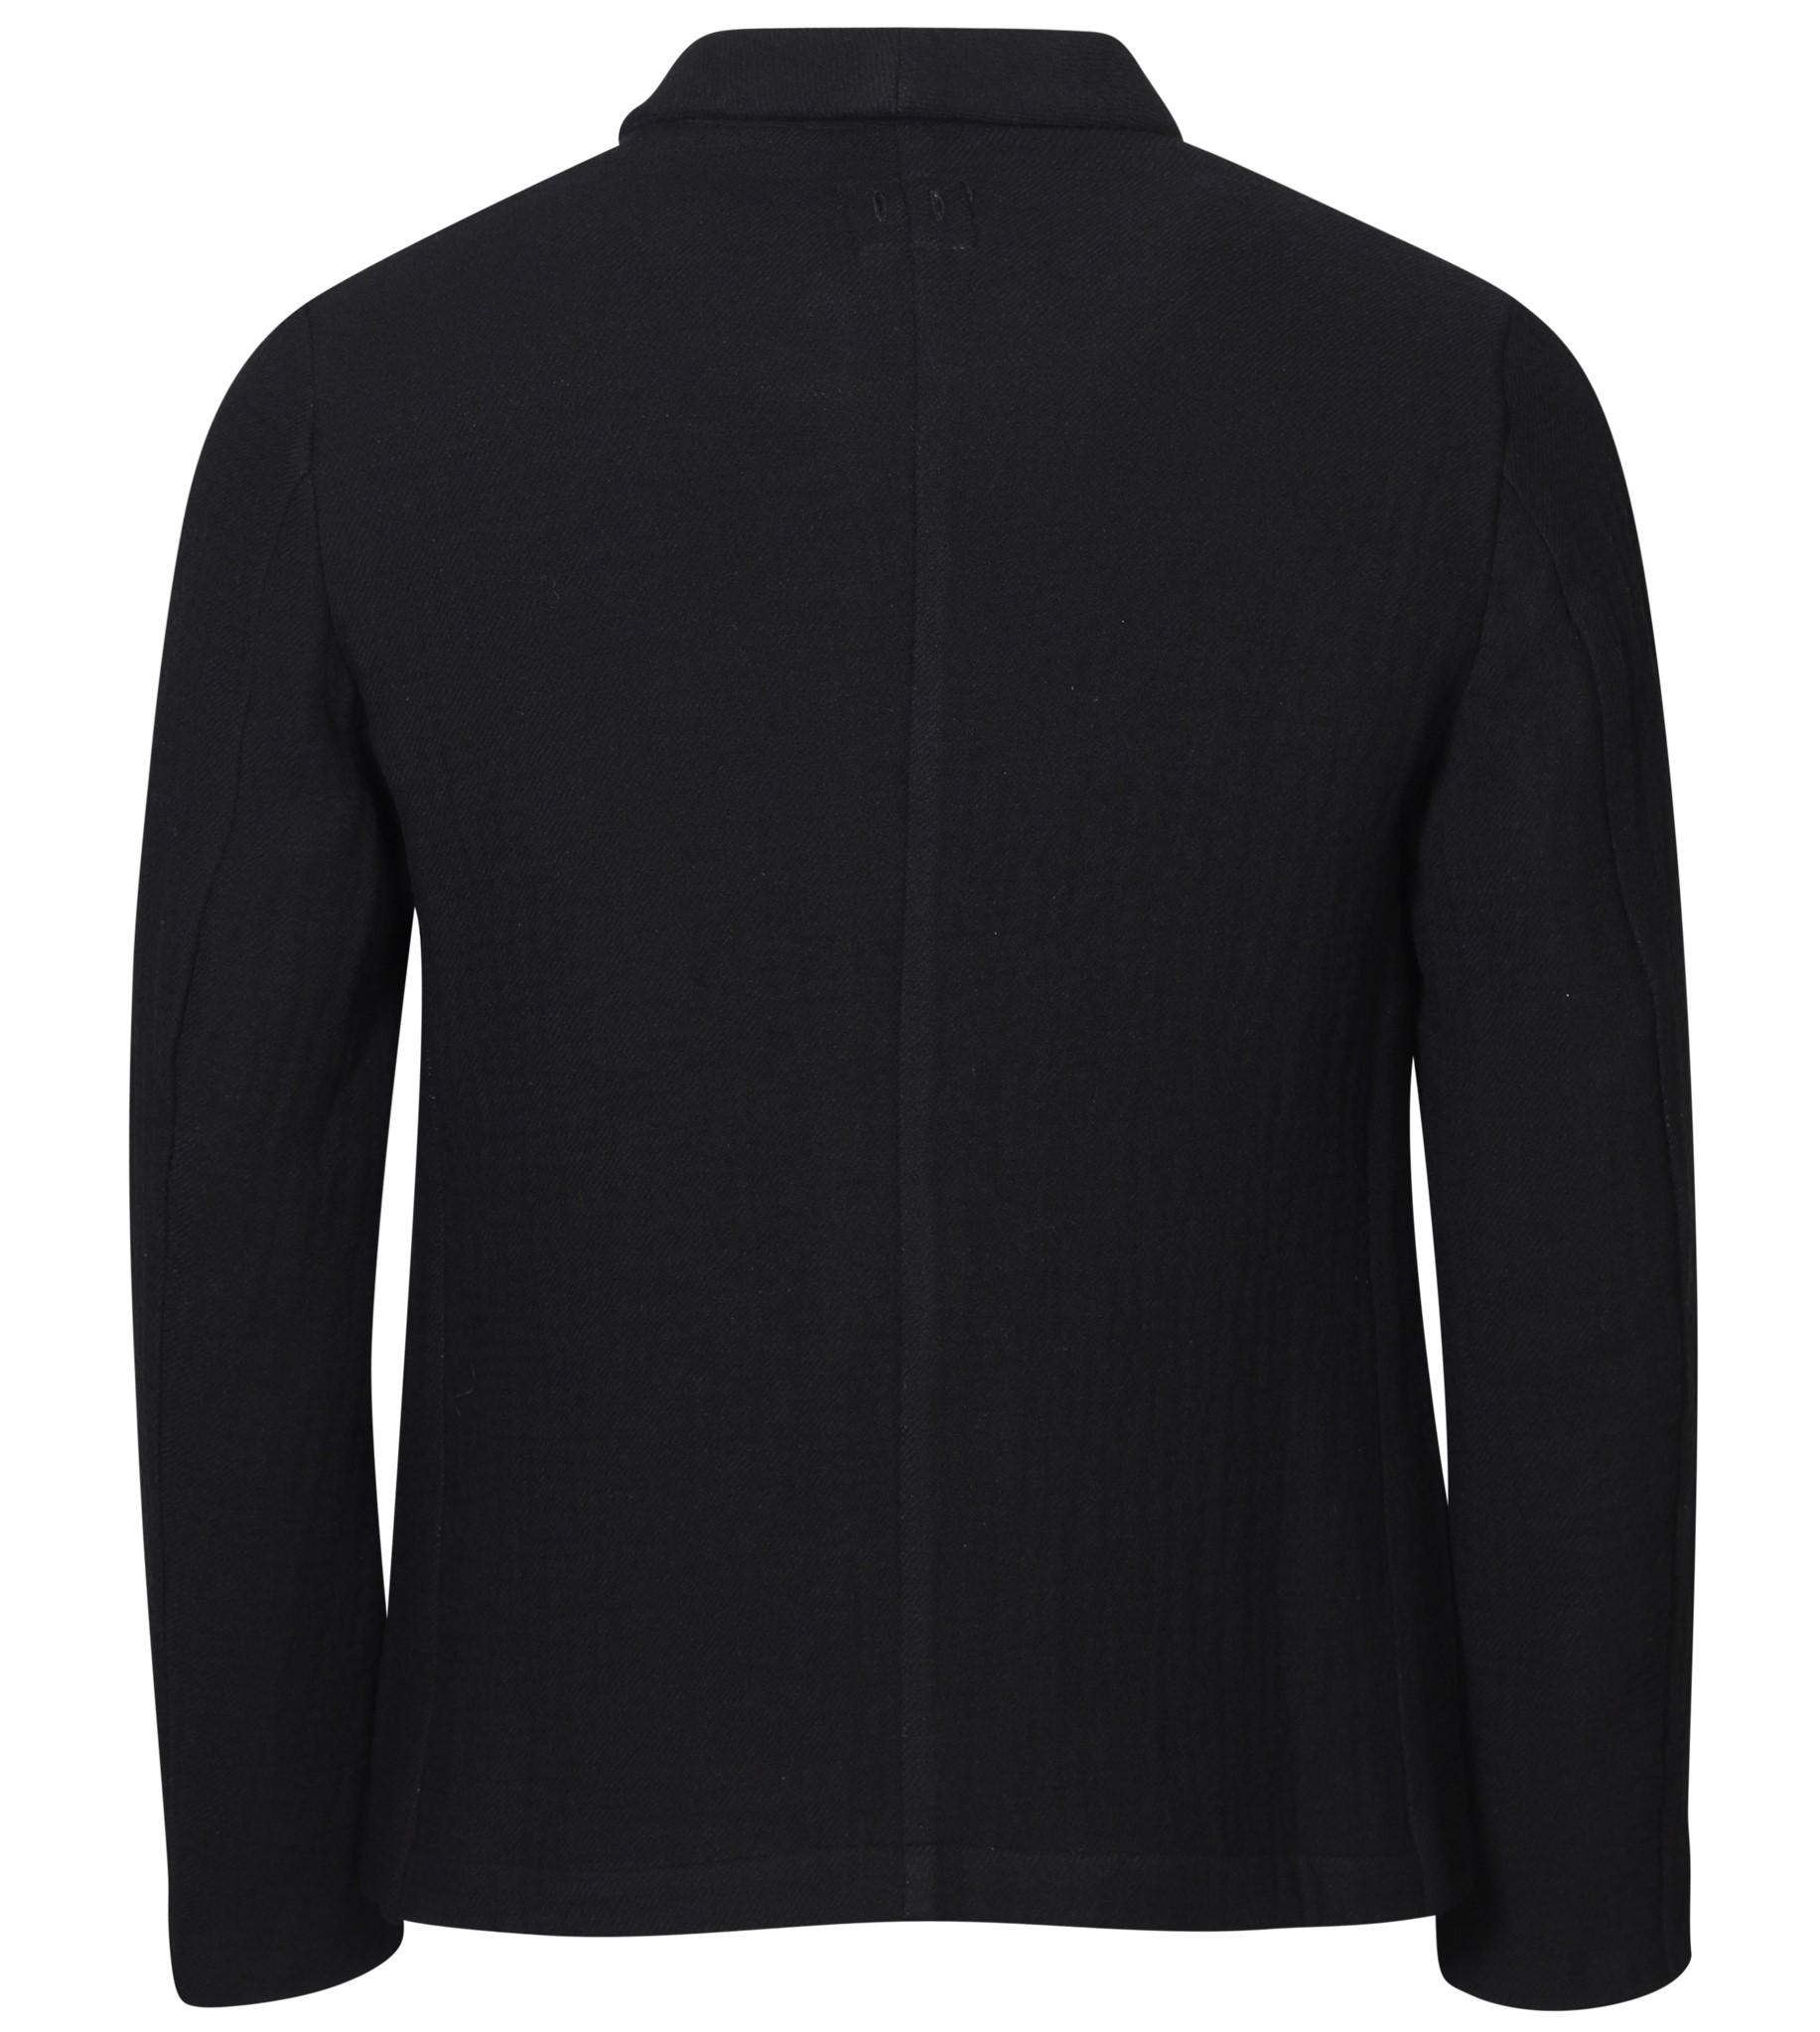 HANNES ROETHER Cotton Wool Jacket in Black